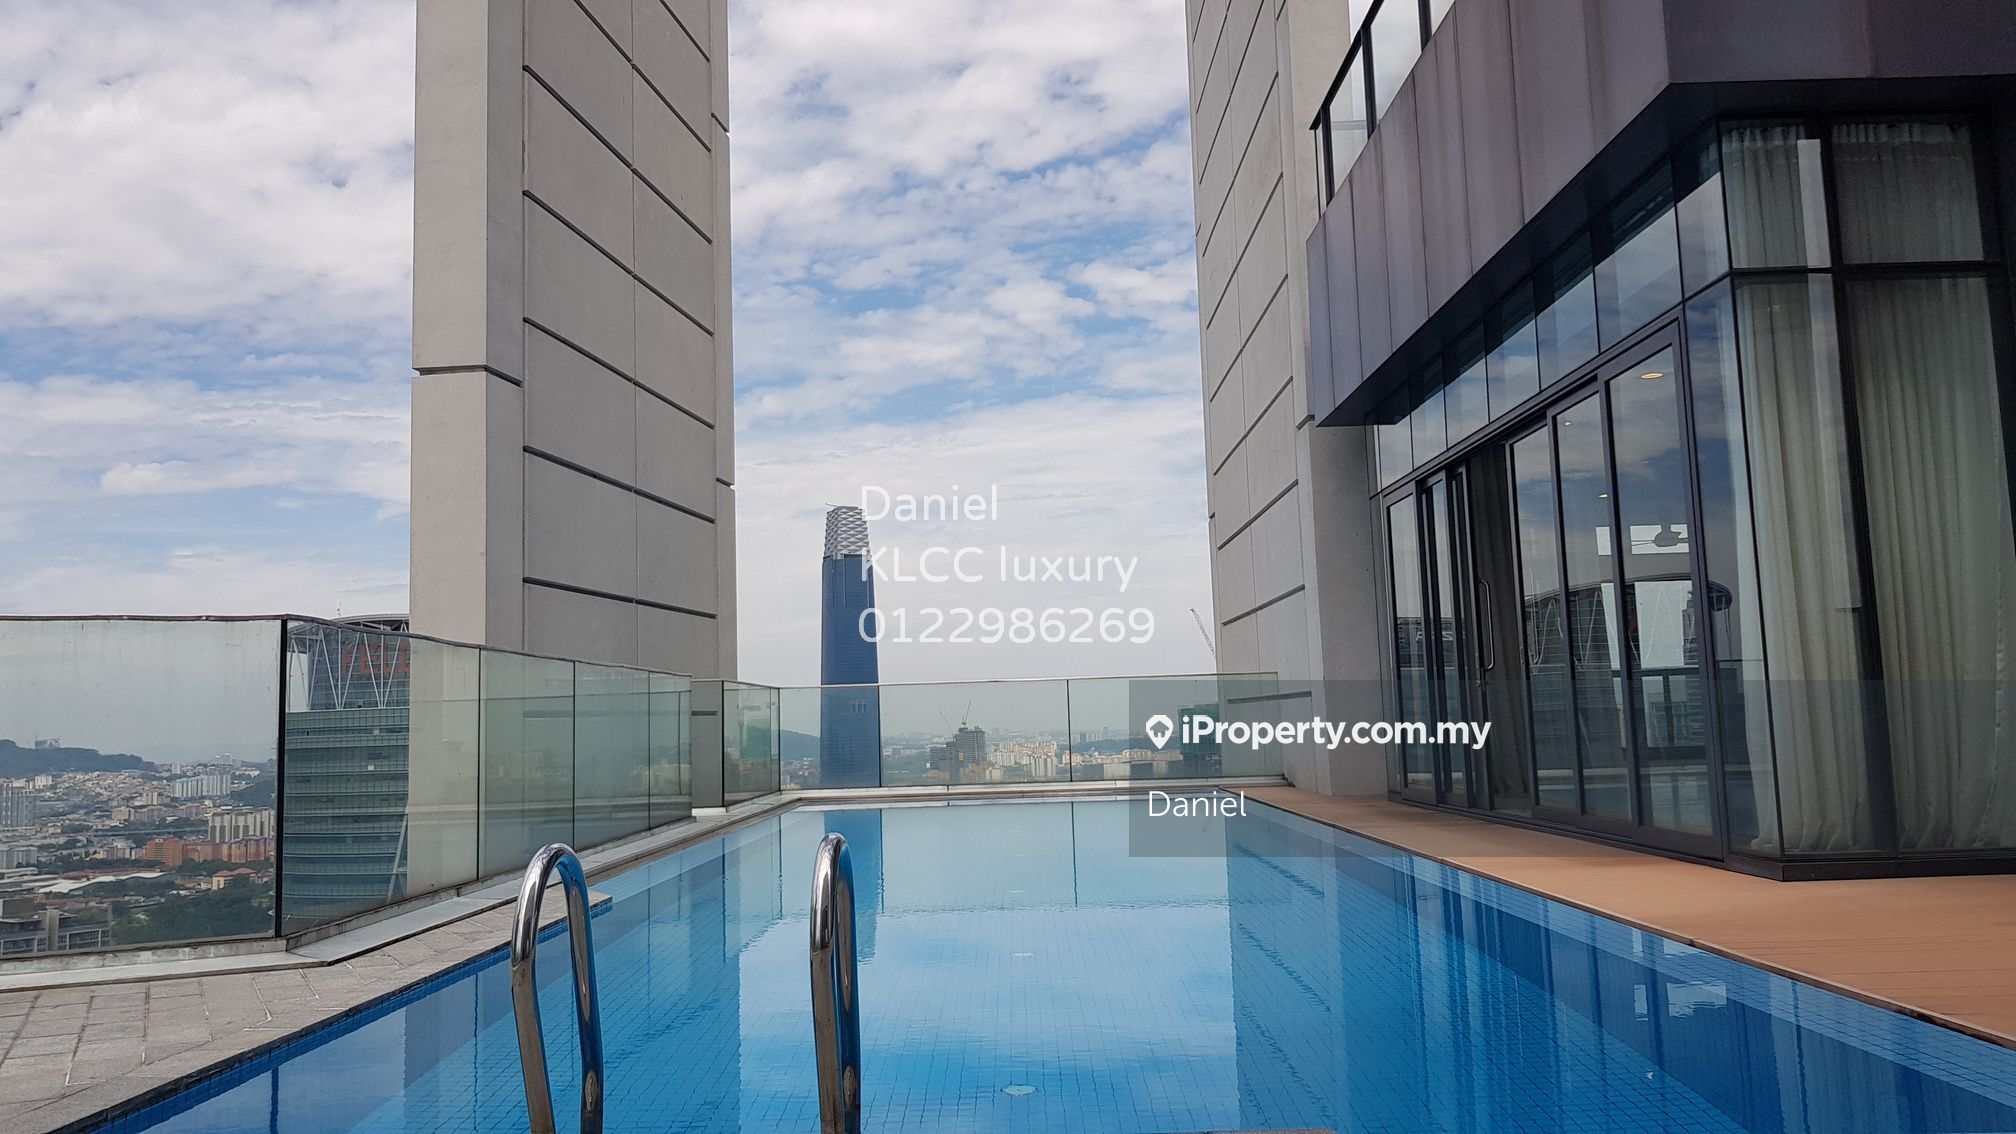 The Troika Penthouse Condominium 7 bedrooms for sale in KLCC, Kuala Lumpur | iProperty.com.my